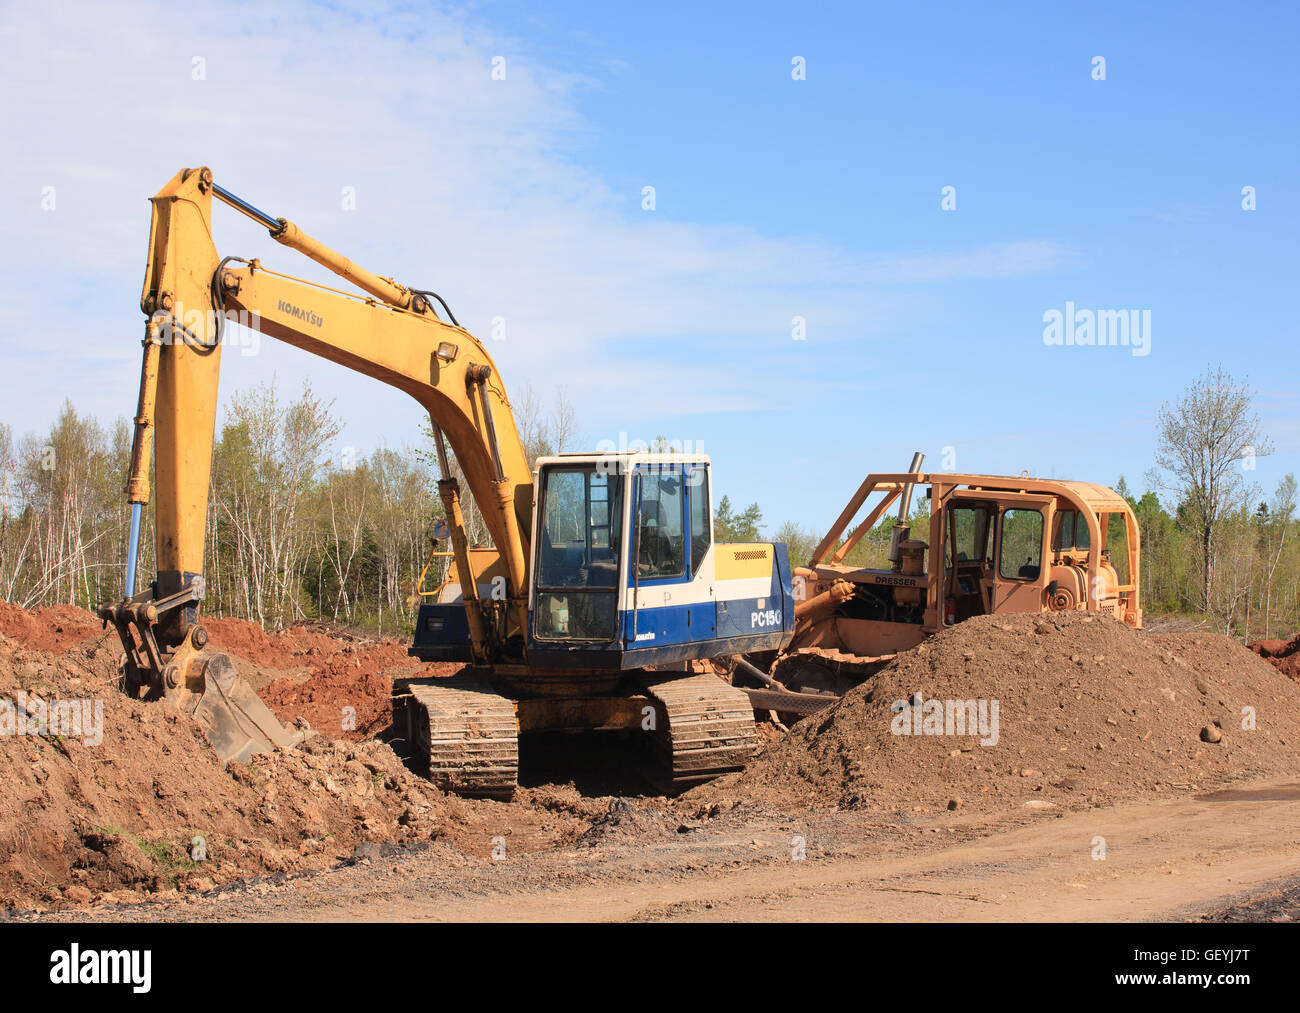 KENNETCOOK, CANADA - MAY 29, 2016: Komatsu excavator and Dresser bulldozer at rural construction site. Stock Photo